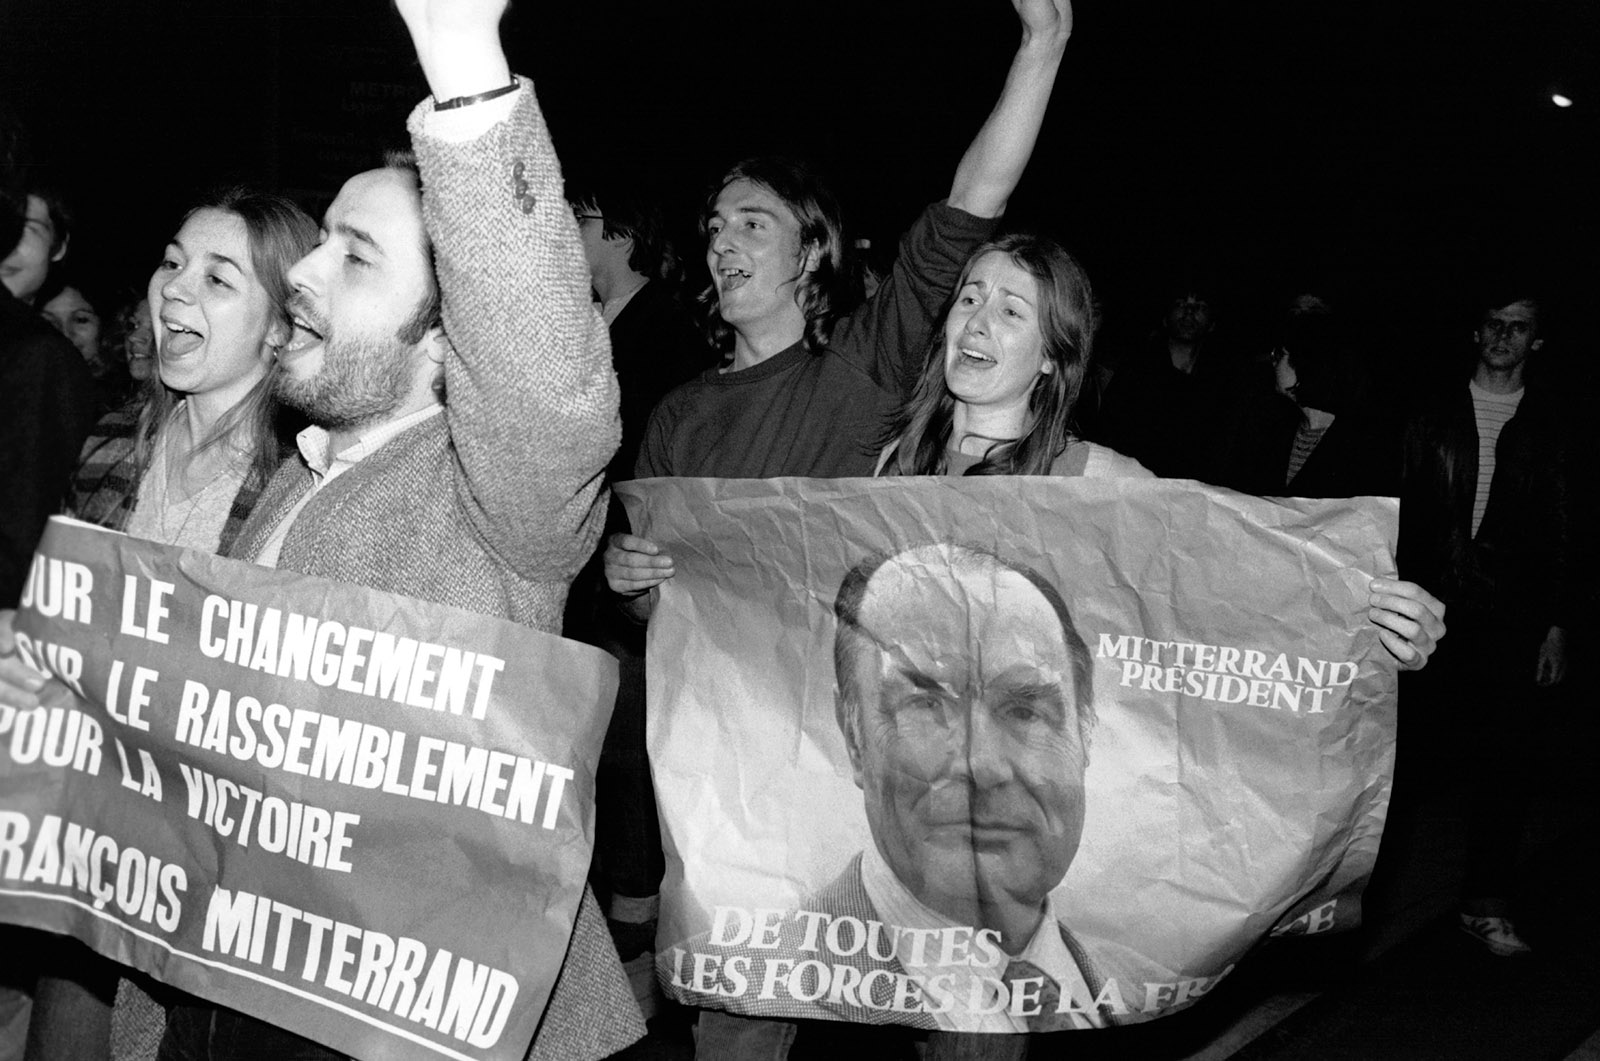 Supporters of François Mitterrand celebrating his election, May 10, 1981